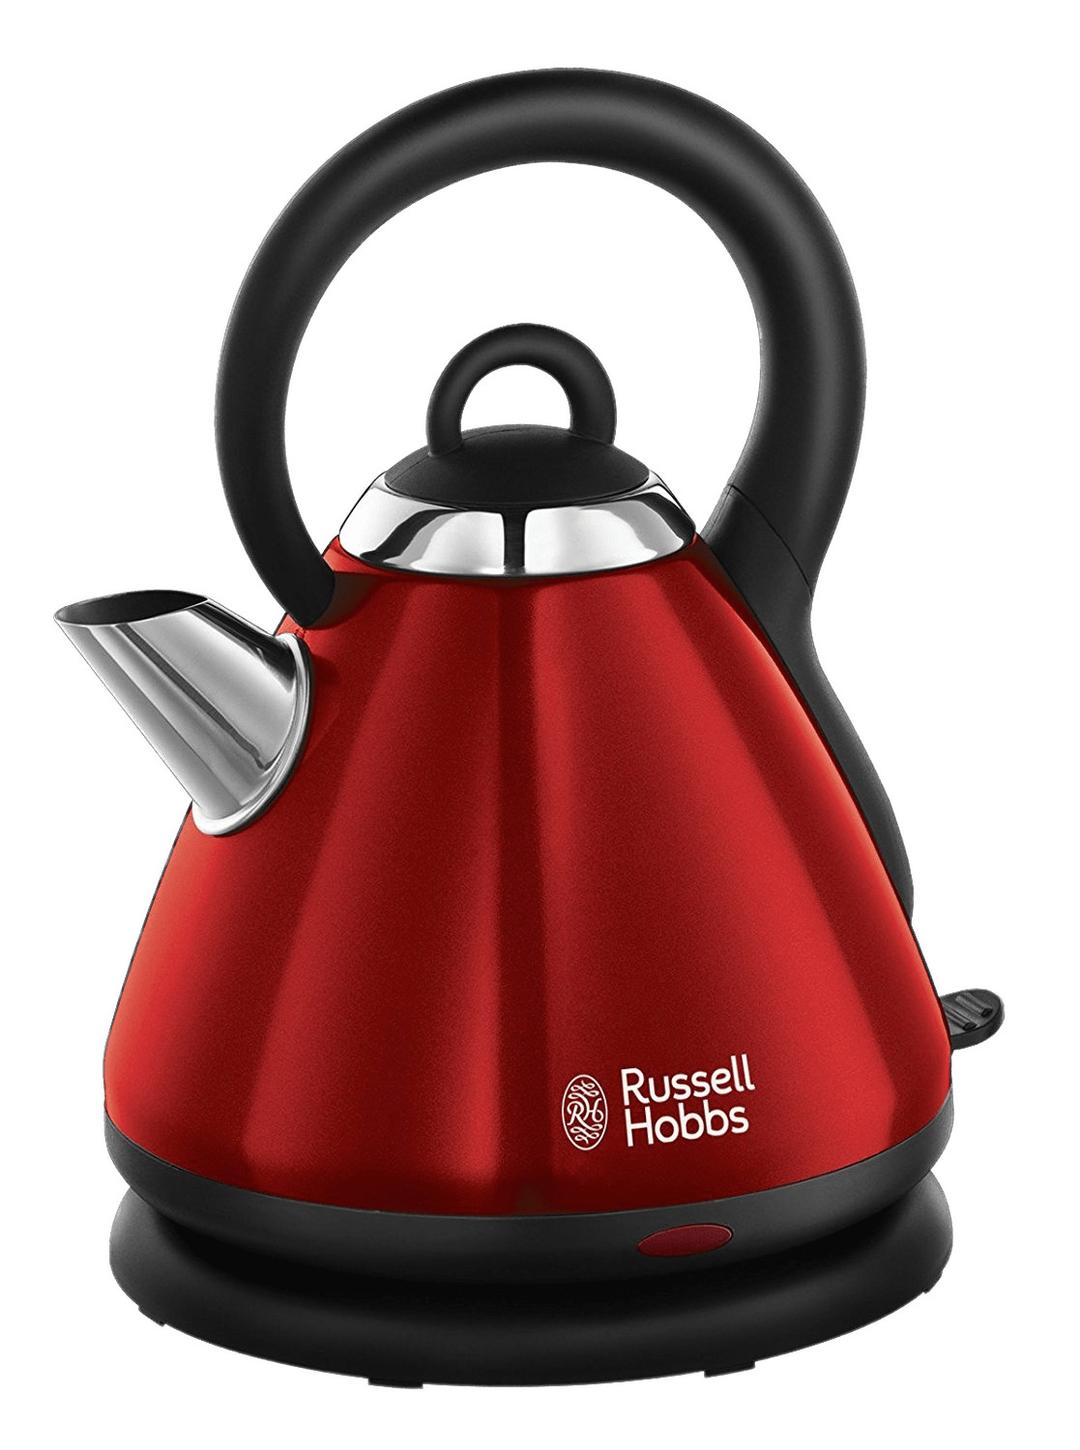 Russel Hobbs Red Kettle png transparent